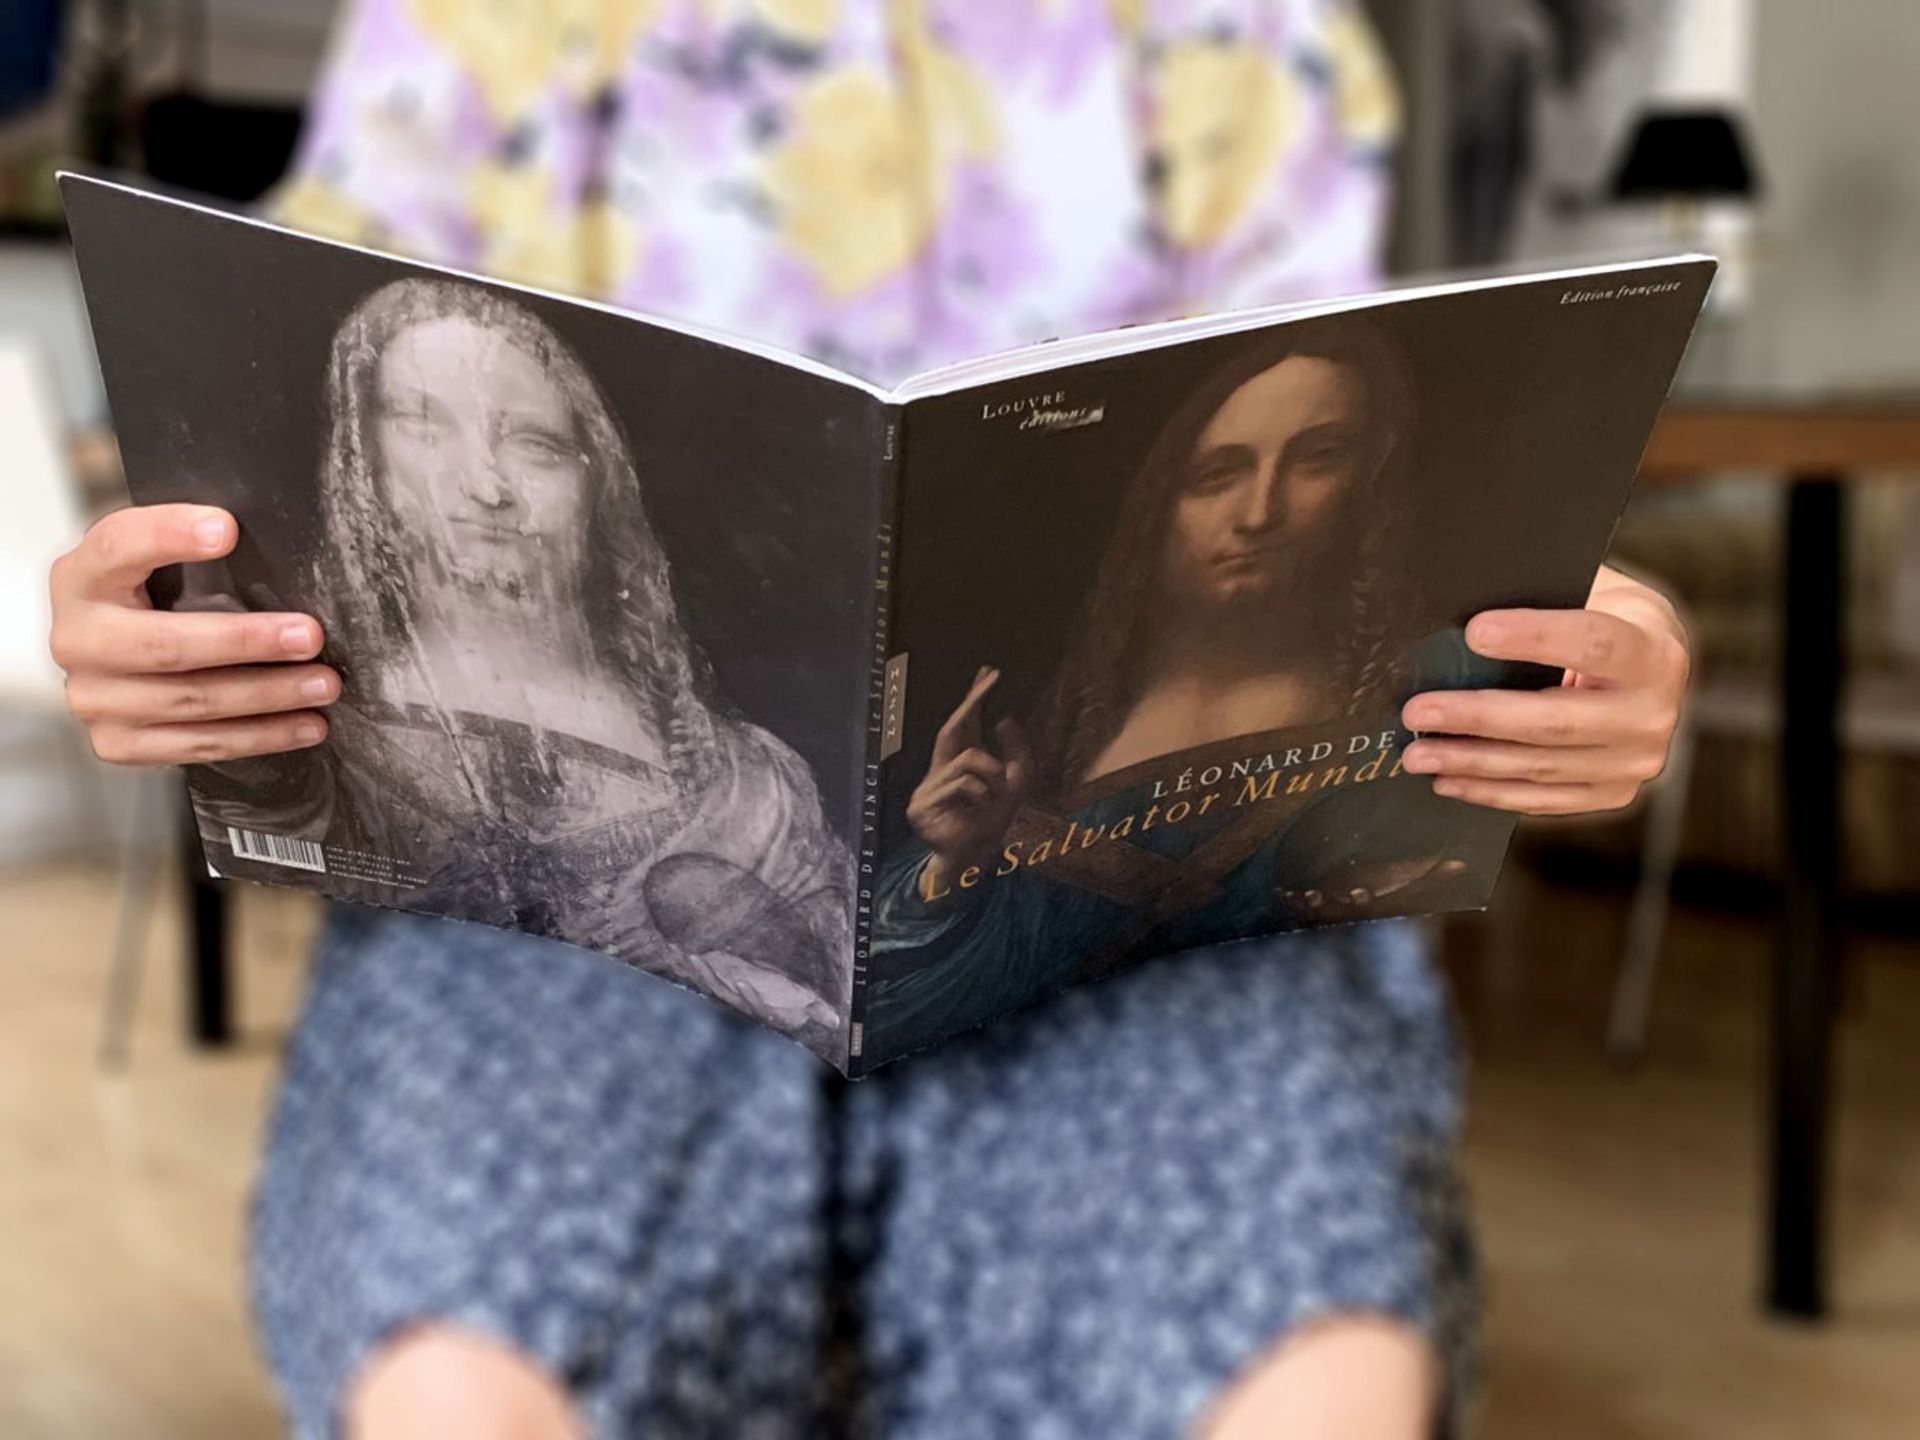 A copy of Léonard de Vinci. Le Salvator Mundi, which was briefly on sale at the Louvre bookshop in December 2019 before being withdrawn © The Art Newspaper, all rights reserved